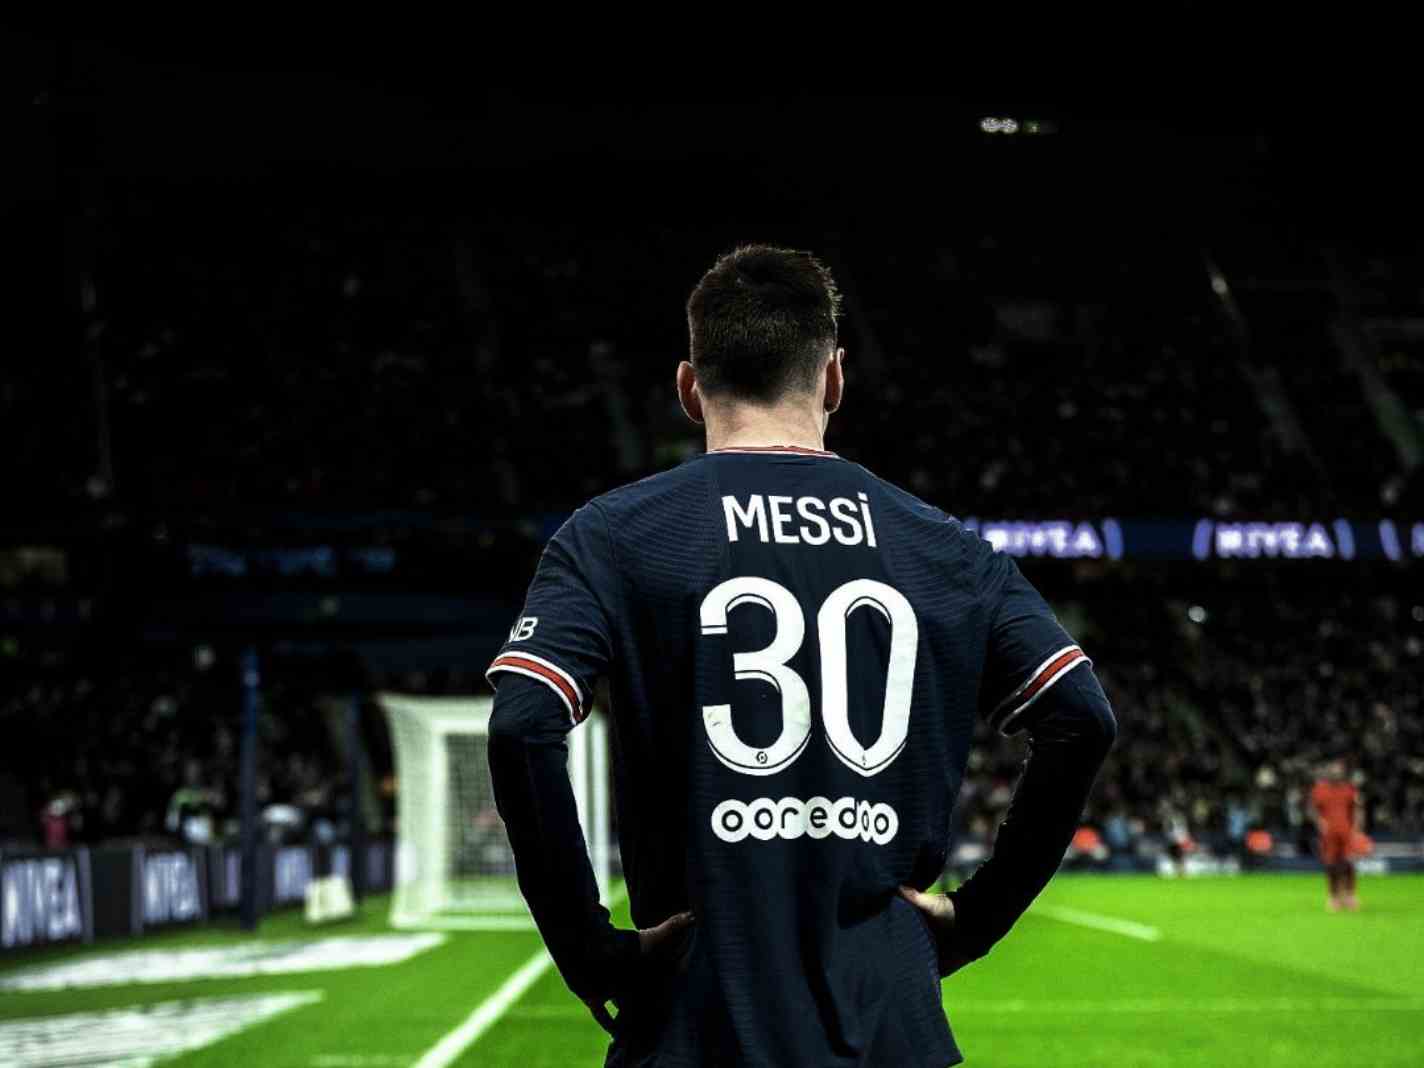 In this image - Lionel Messi in action during a PSG game